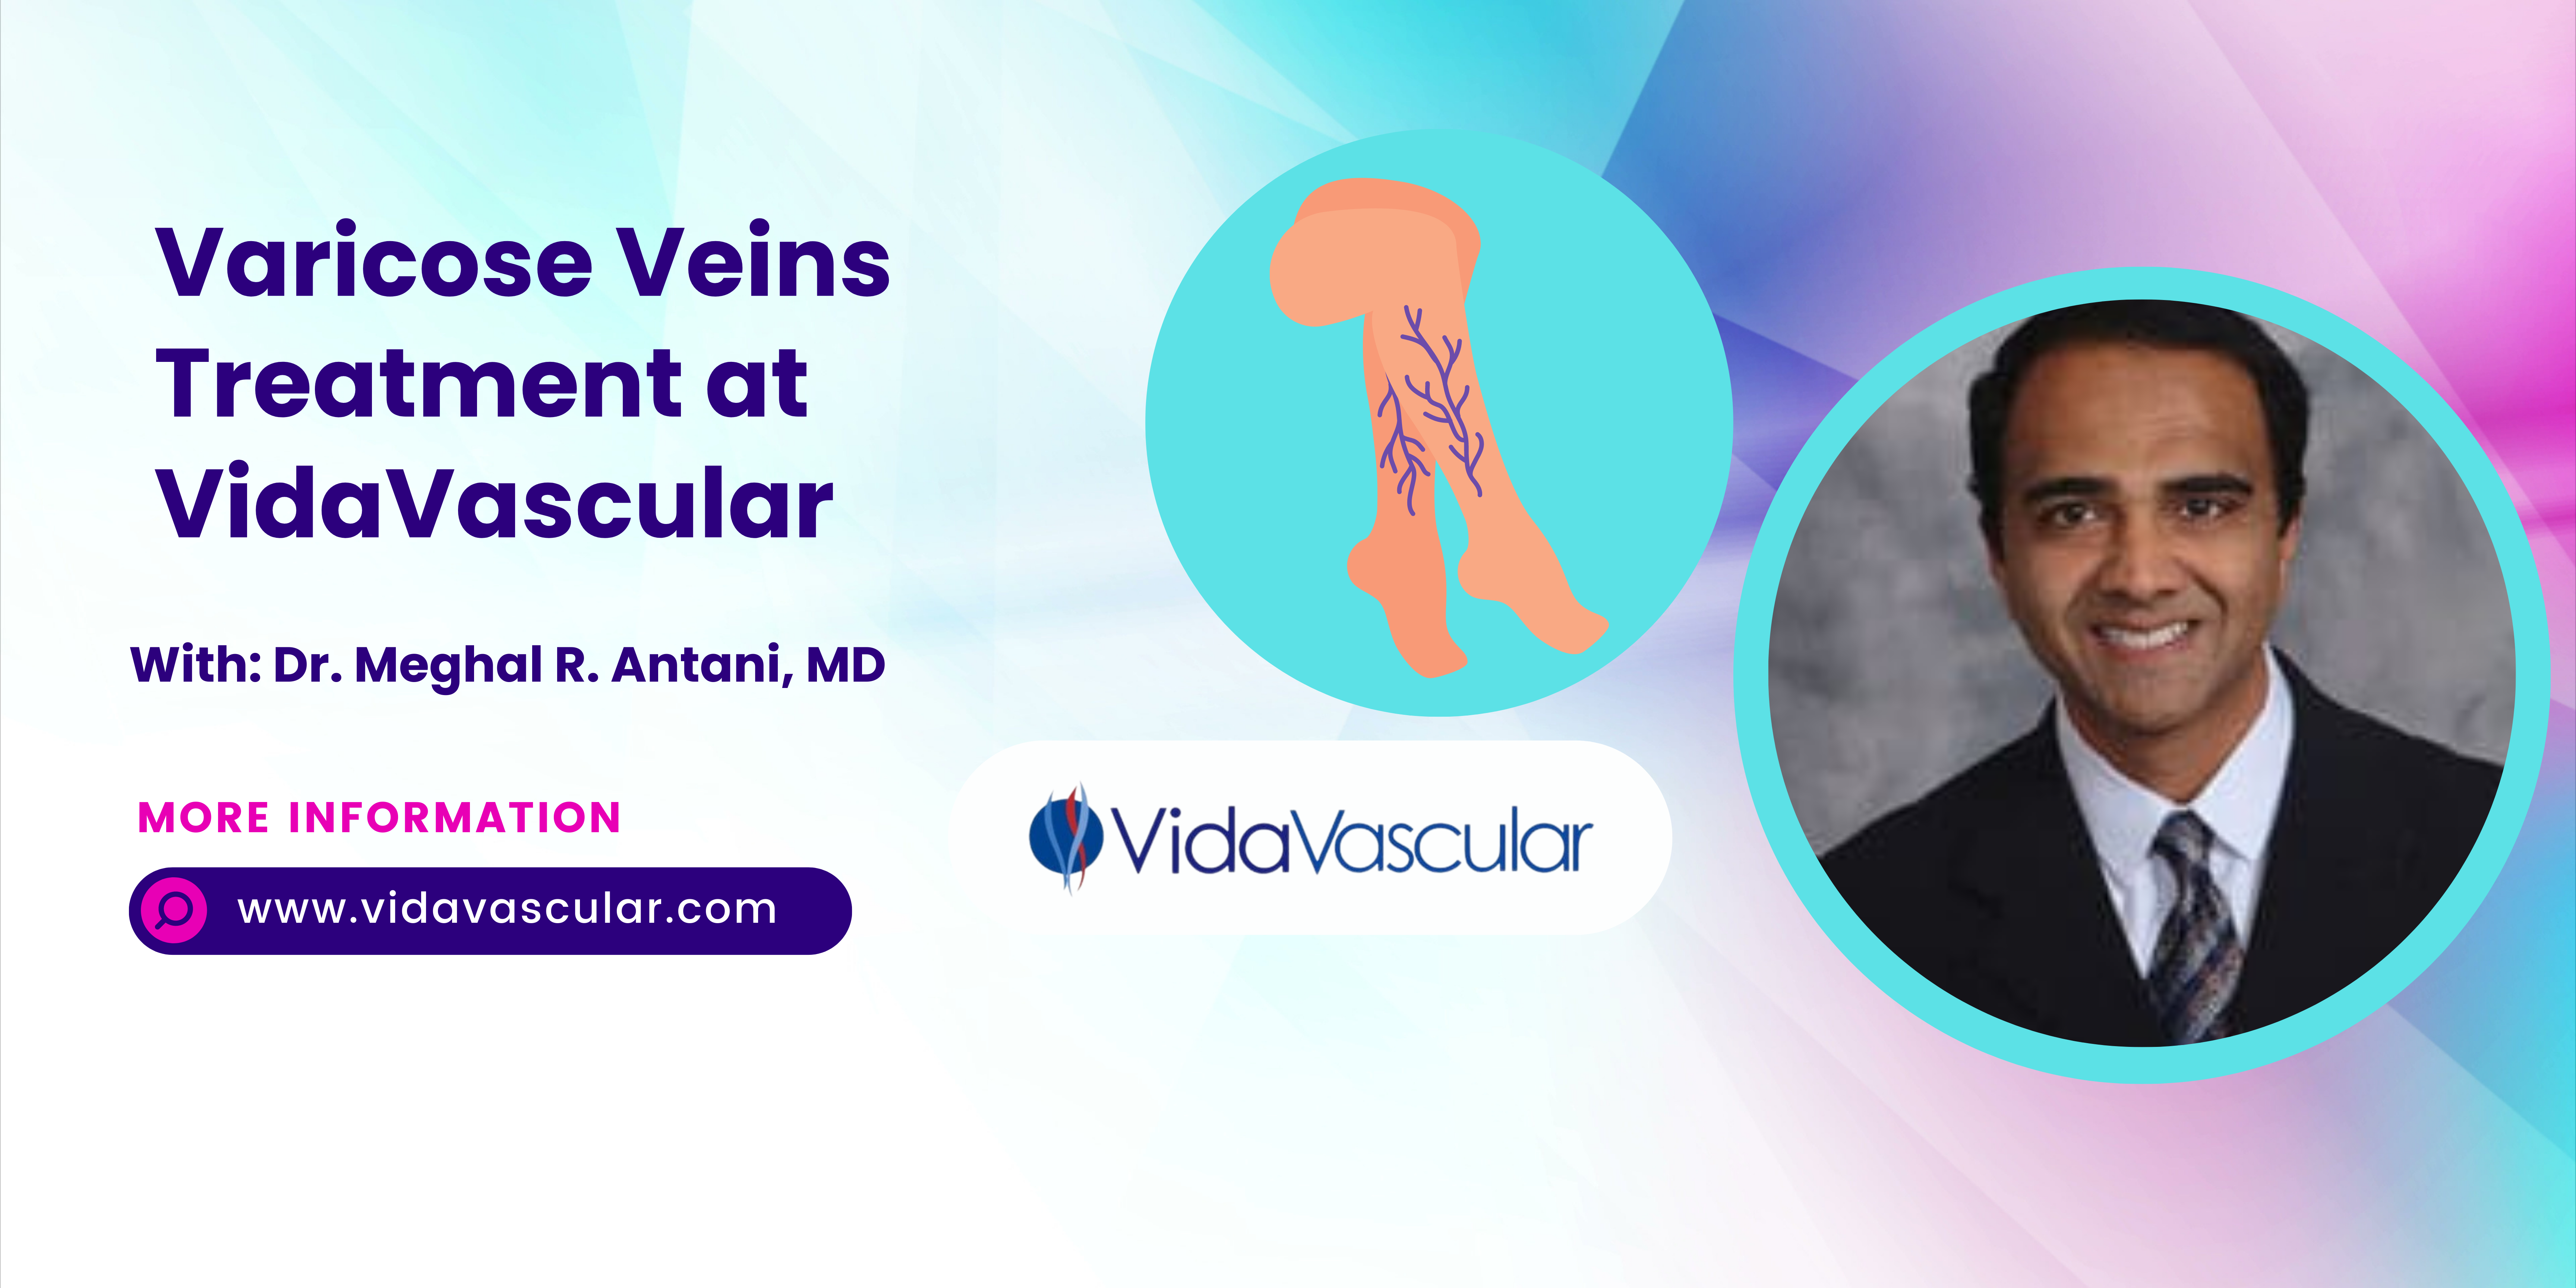 Are You Searching For The Best Varicose Veins Treatment In National Harbor?